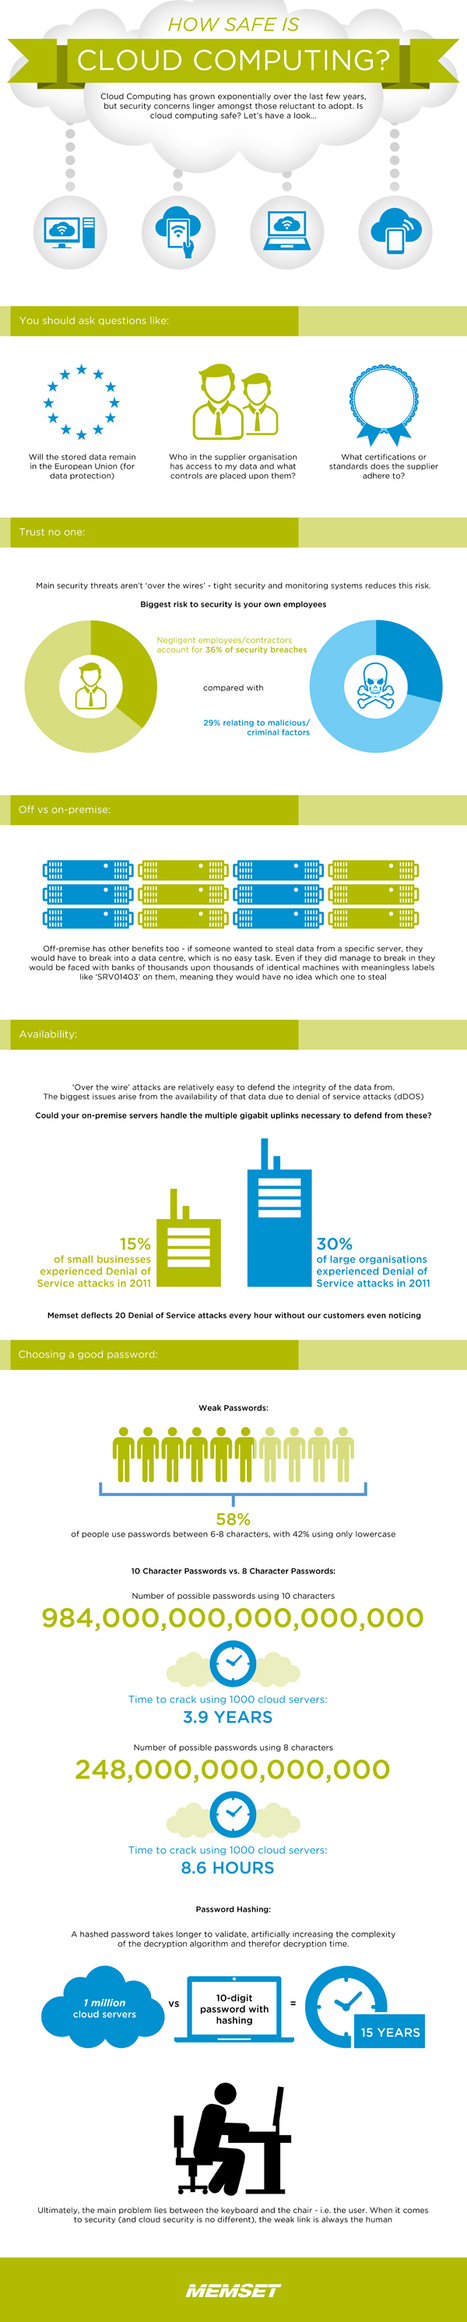 INFOGRAPHIC: How Safe is The Cloud? | MarketingHits | Scoop.it